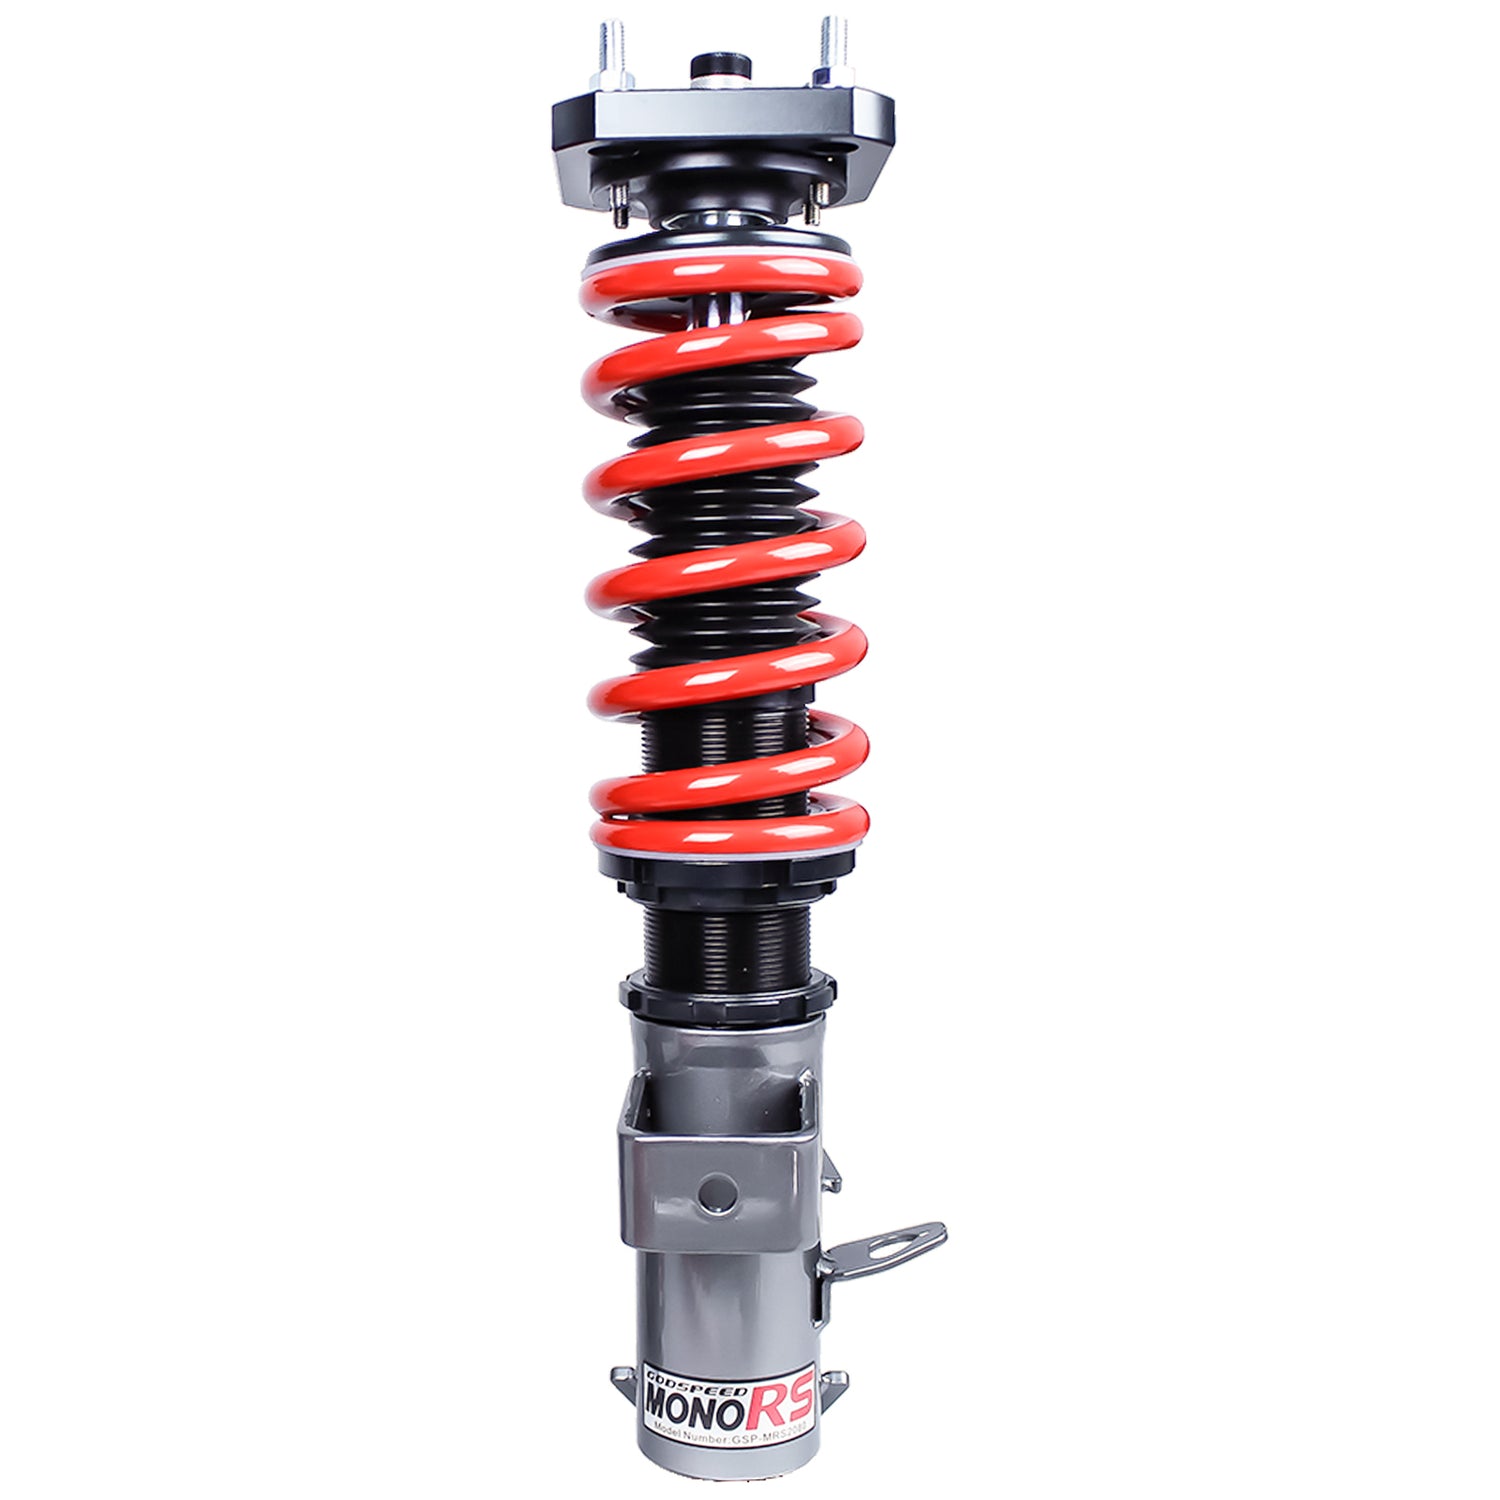 Godspeed(MRS2080) MonoRS Coilovers, Toyota MR2 91-98(SW20), Fully Adjustable, Set of 4